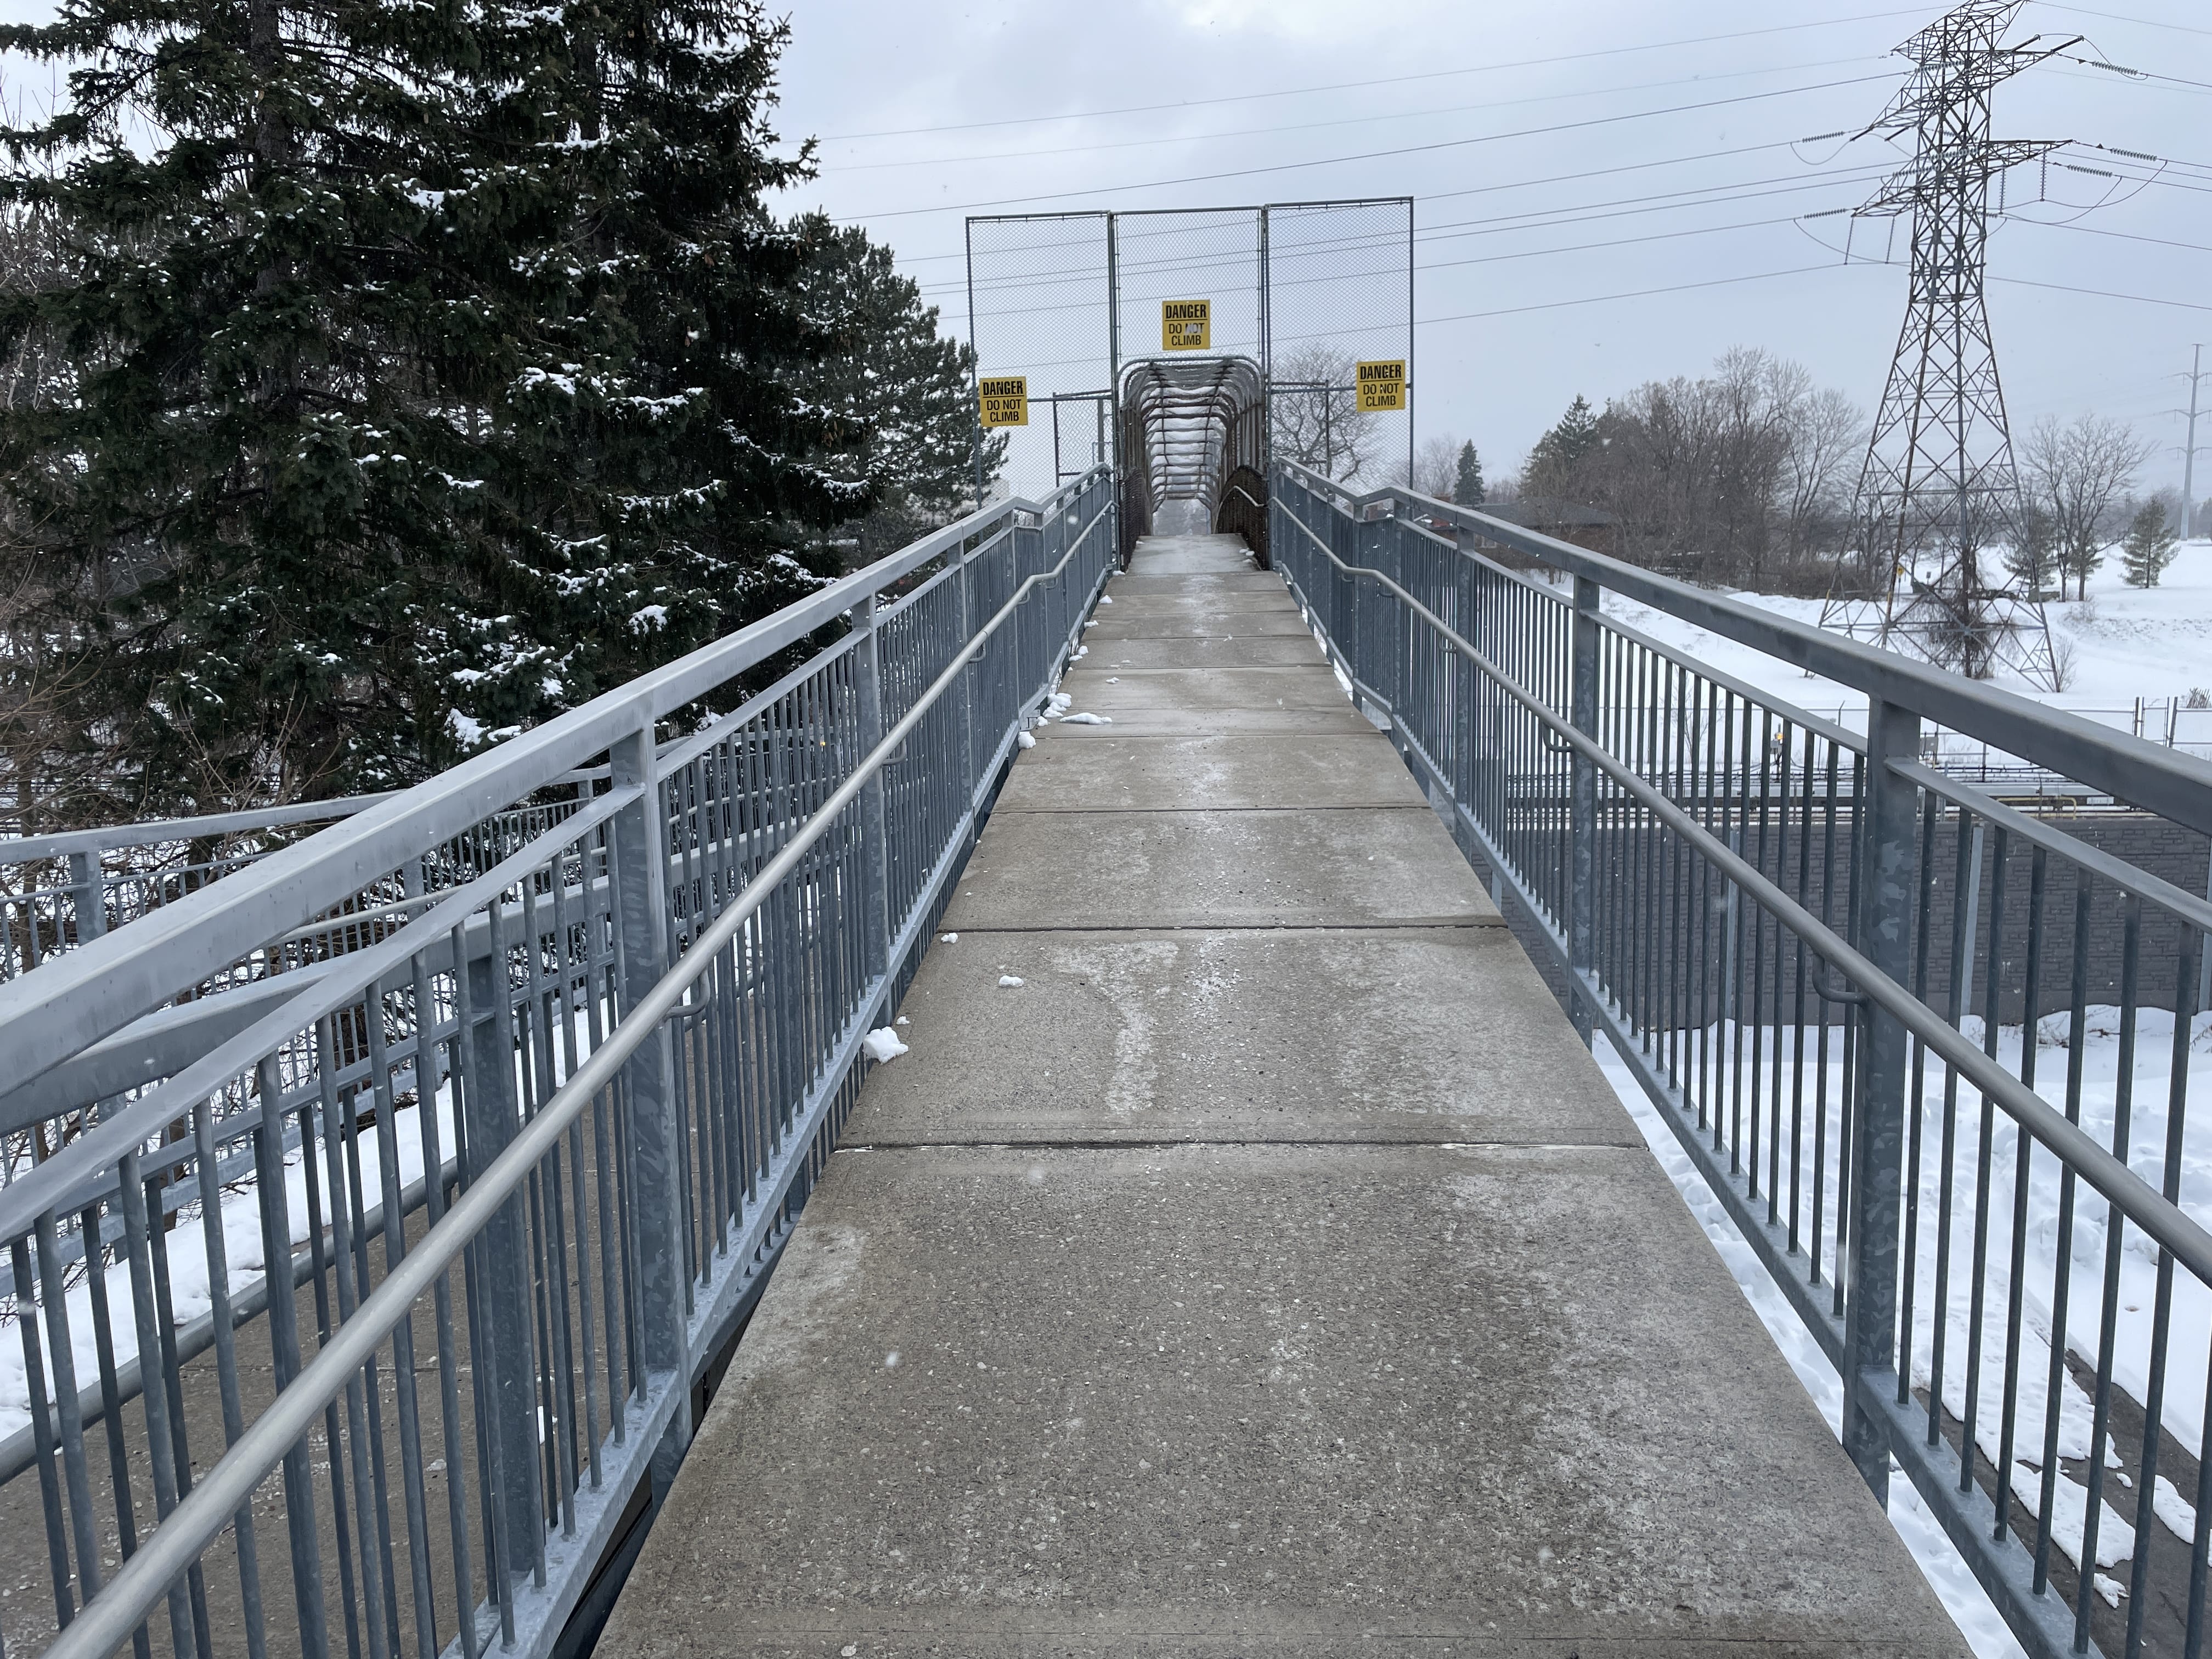 Daytime photo of the east side of the bridge over the rail line, which has straight ramps stacked back and forth down to ground level. The pavement is clear and visibly salted. In the background are some large evergreen trees and a power line.